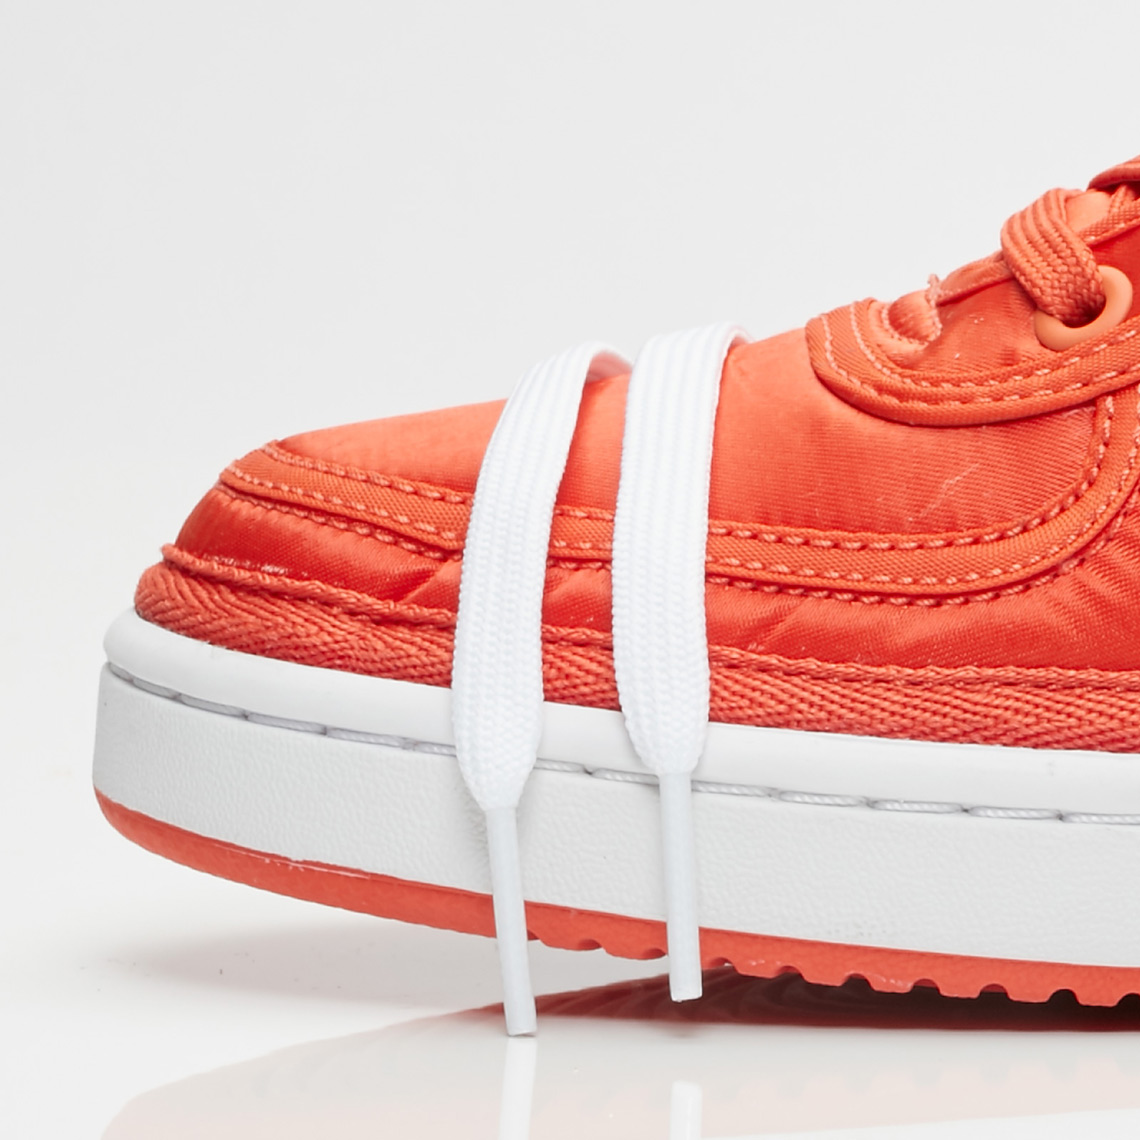 Nike Vandal High Vintage Coral Available Now 4